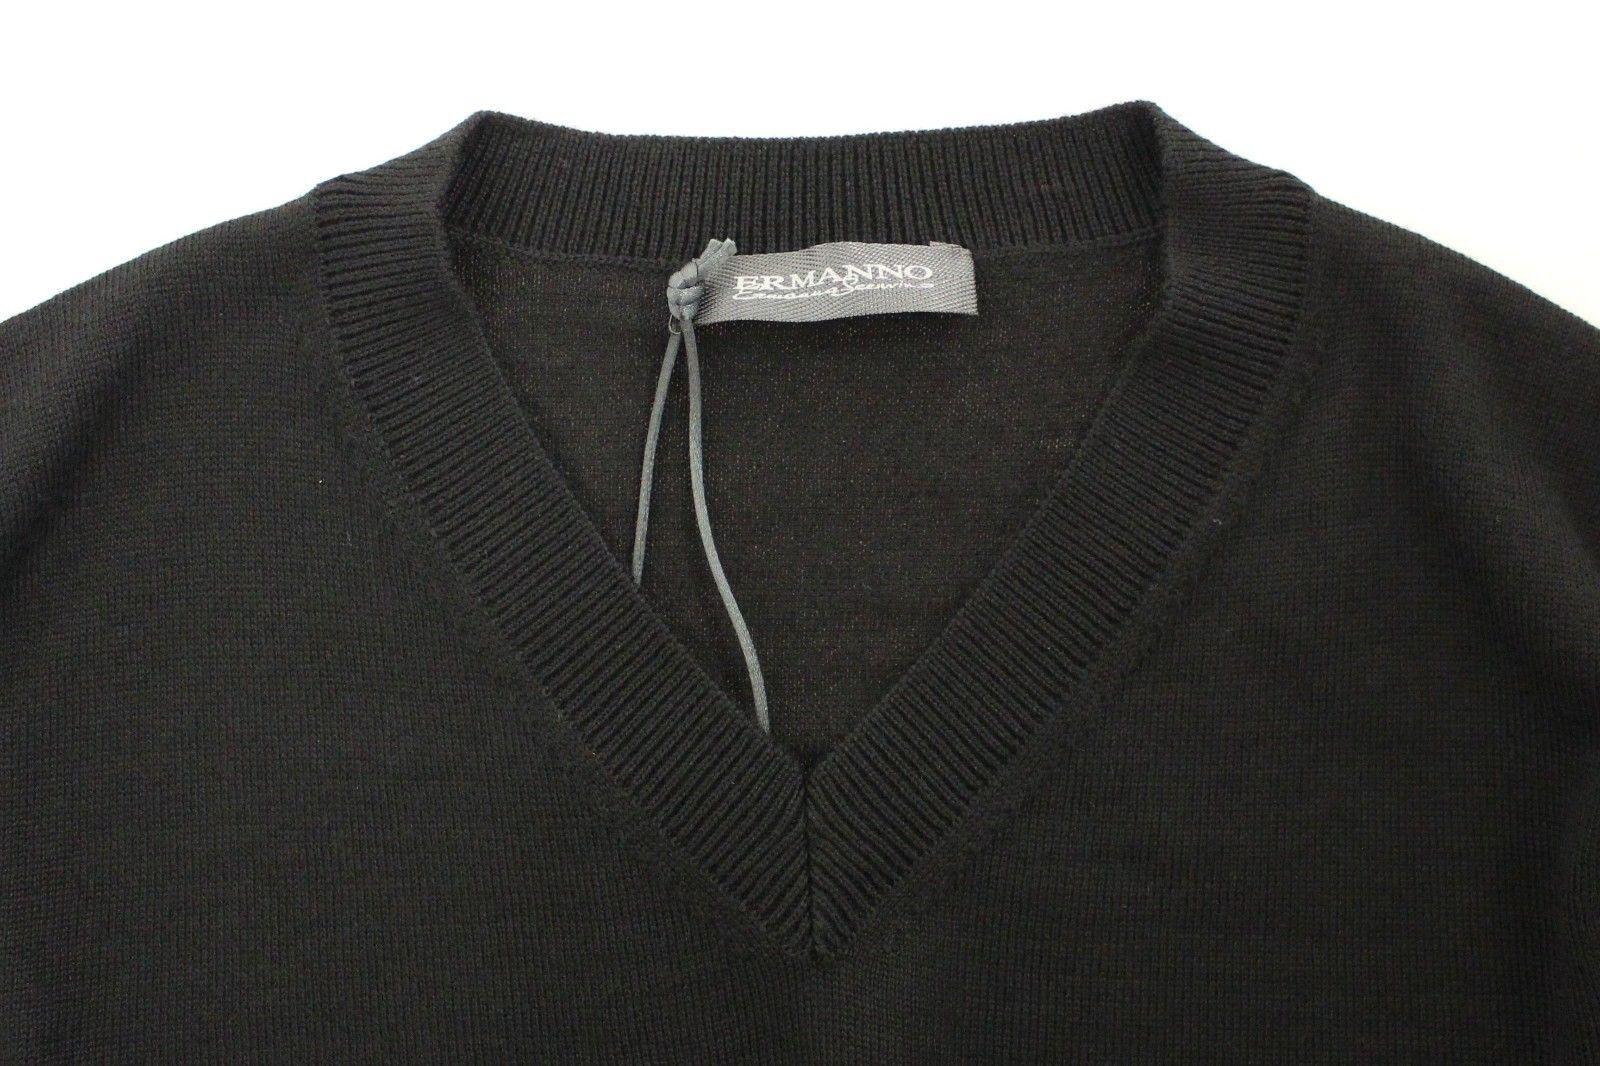 Black Wool Blend V-neck Pullover Sweater - Designed by Ermanno Scervino Available to Buy at a Discounted Price on Moon Behind The Hill Online Designer Discount Store